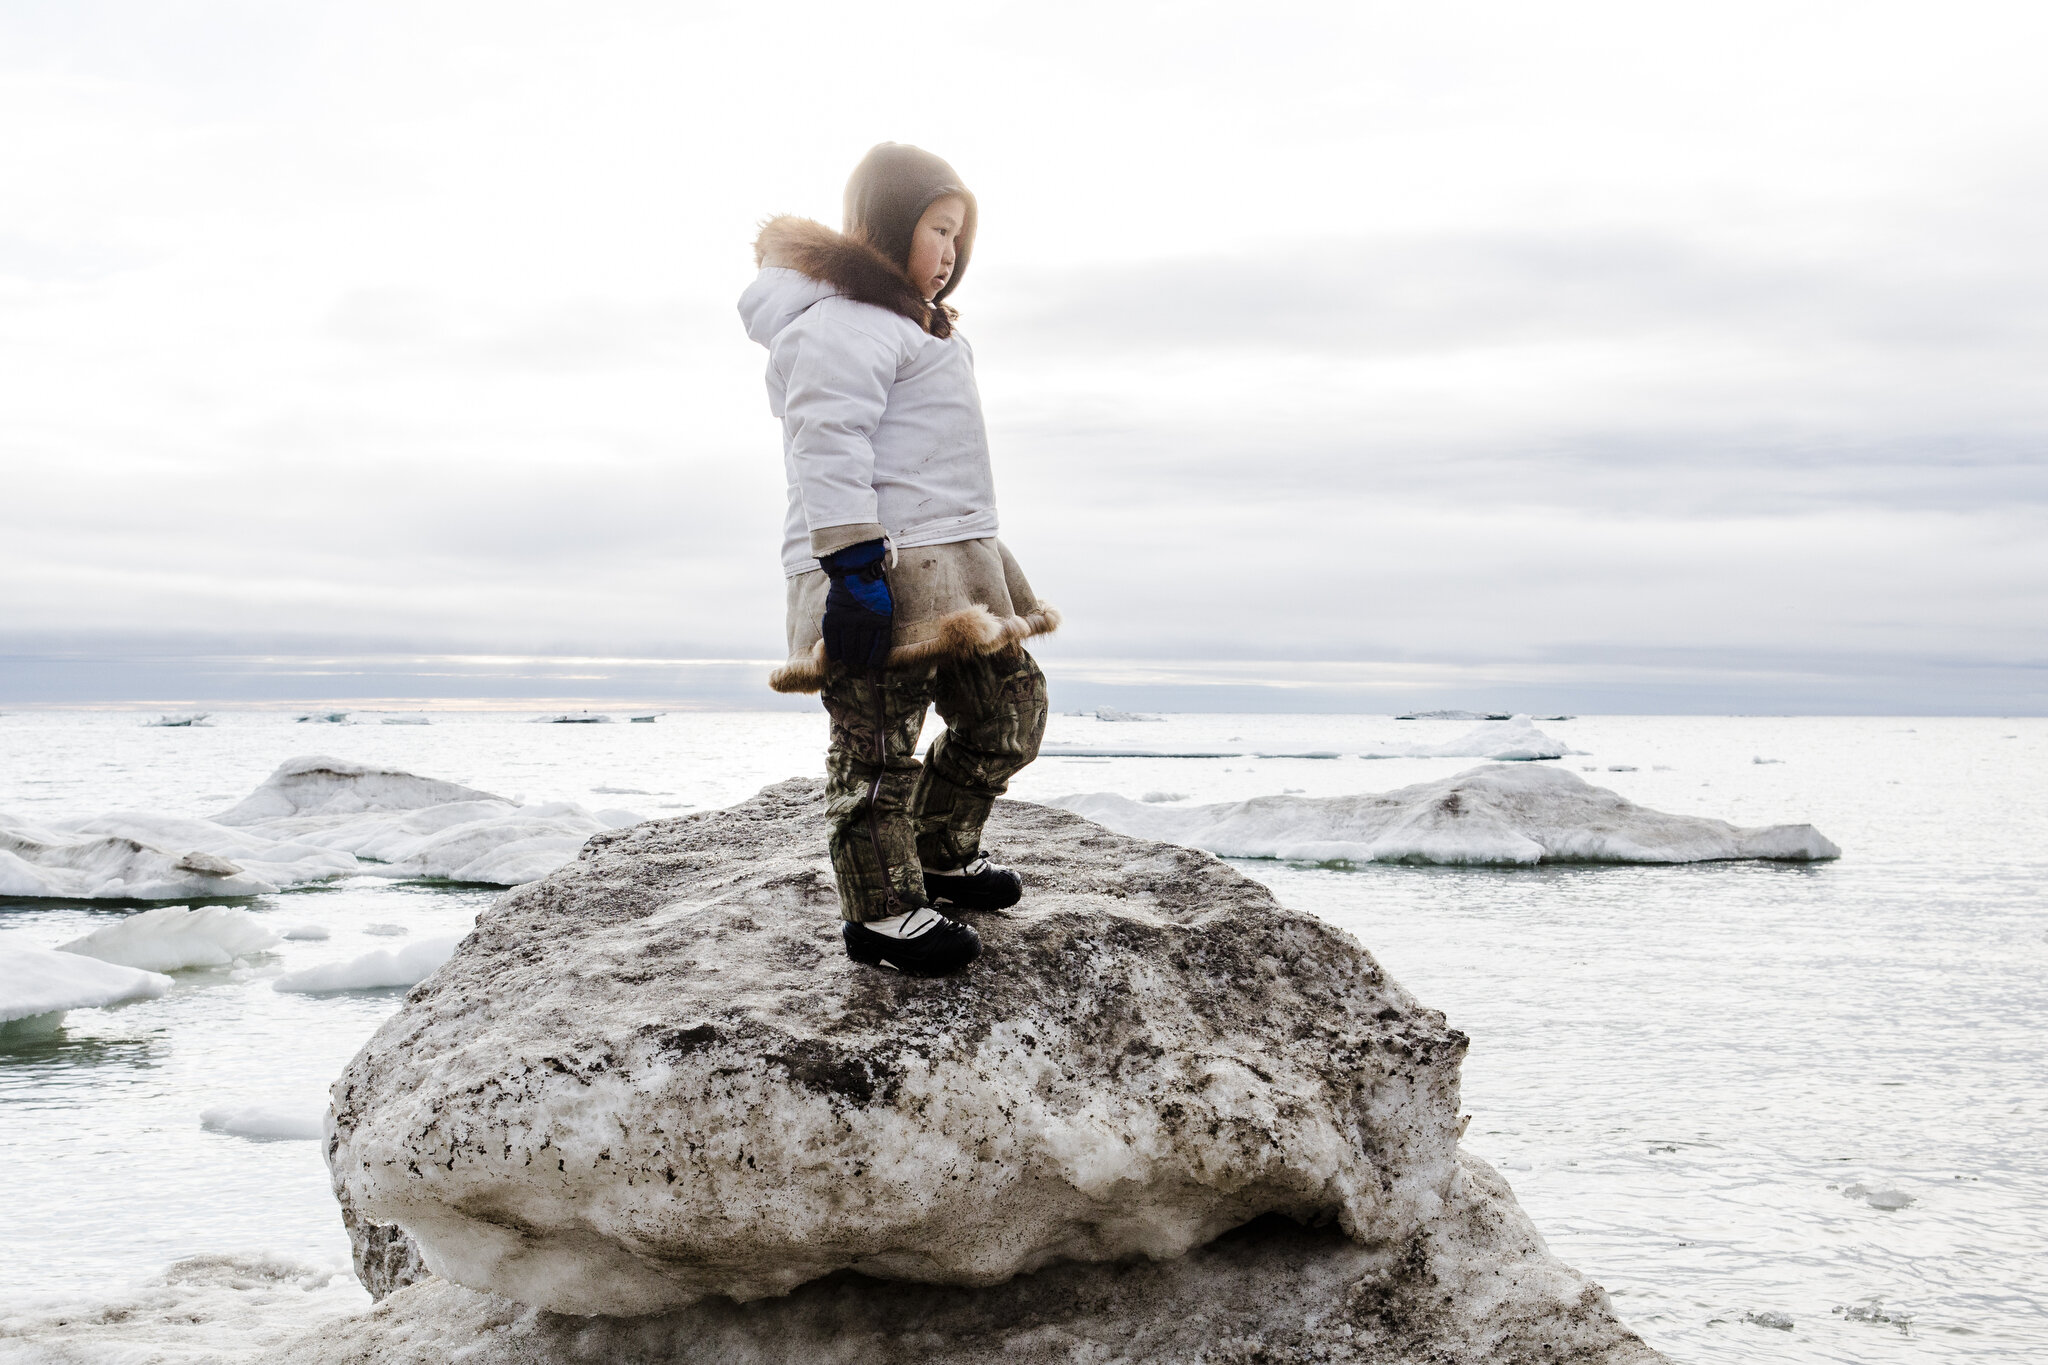  Leo Sage returns to town in Utqiagvik, Alaska, after hunting bearded seals with his father by boat in the Arctic Ocean. They were unsuccessful. June 27th, 2015. July 2019 was officially the warmest month in Alaskan history, and Utqiagvik, the northe